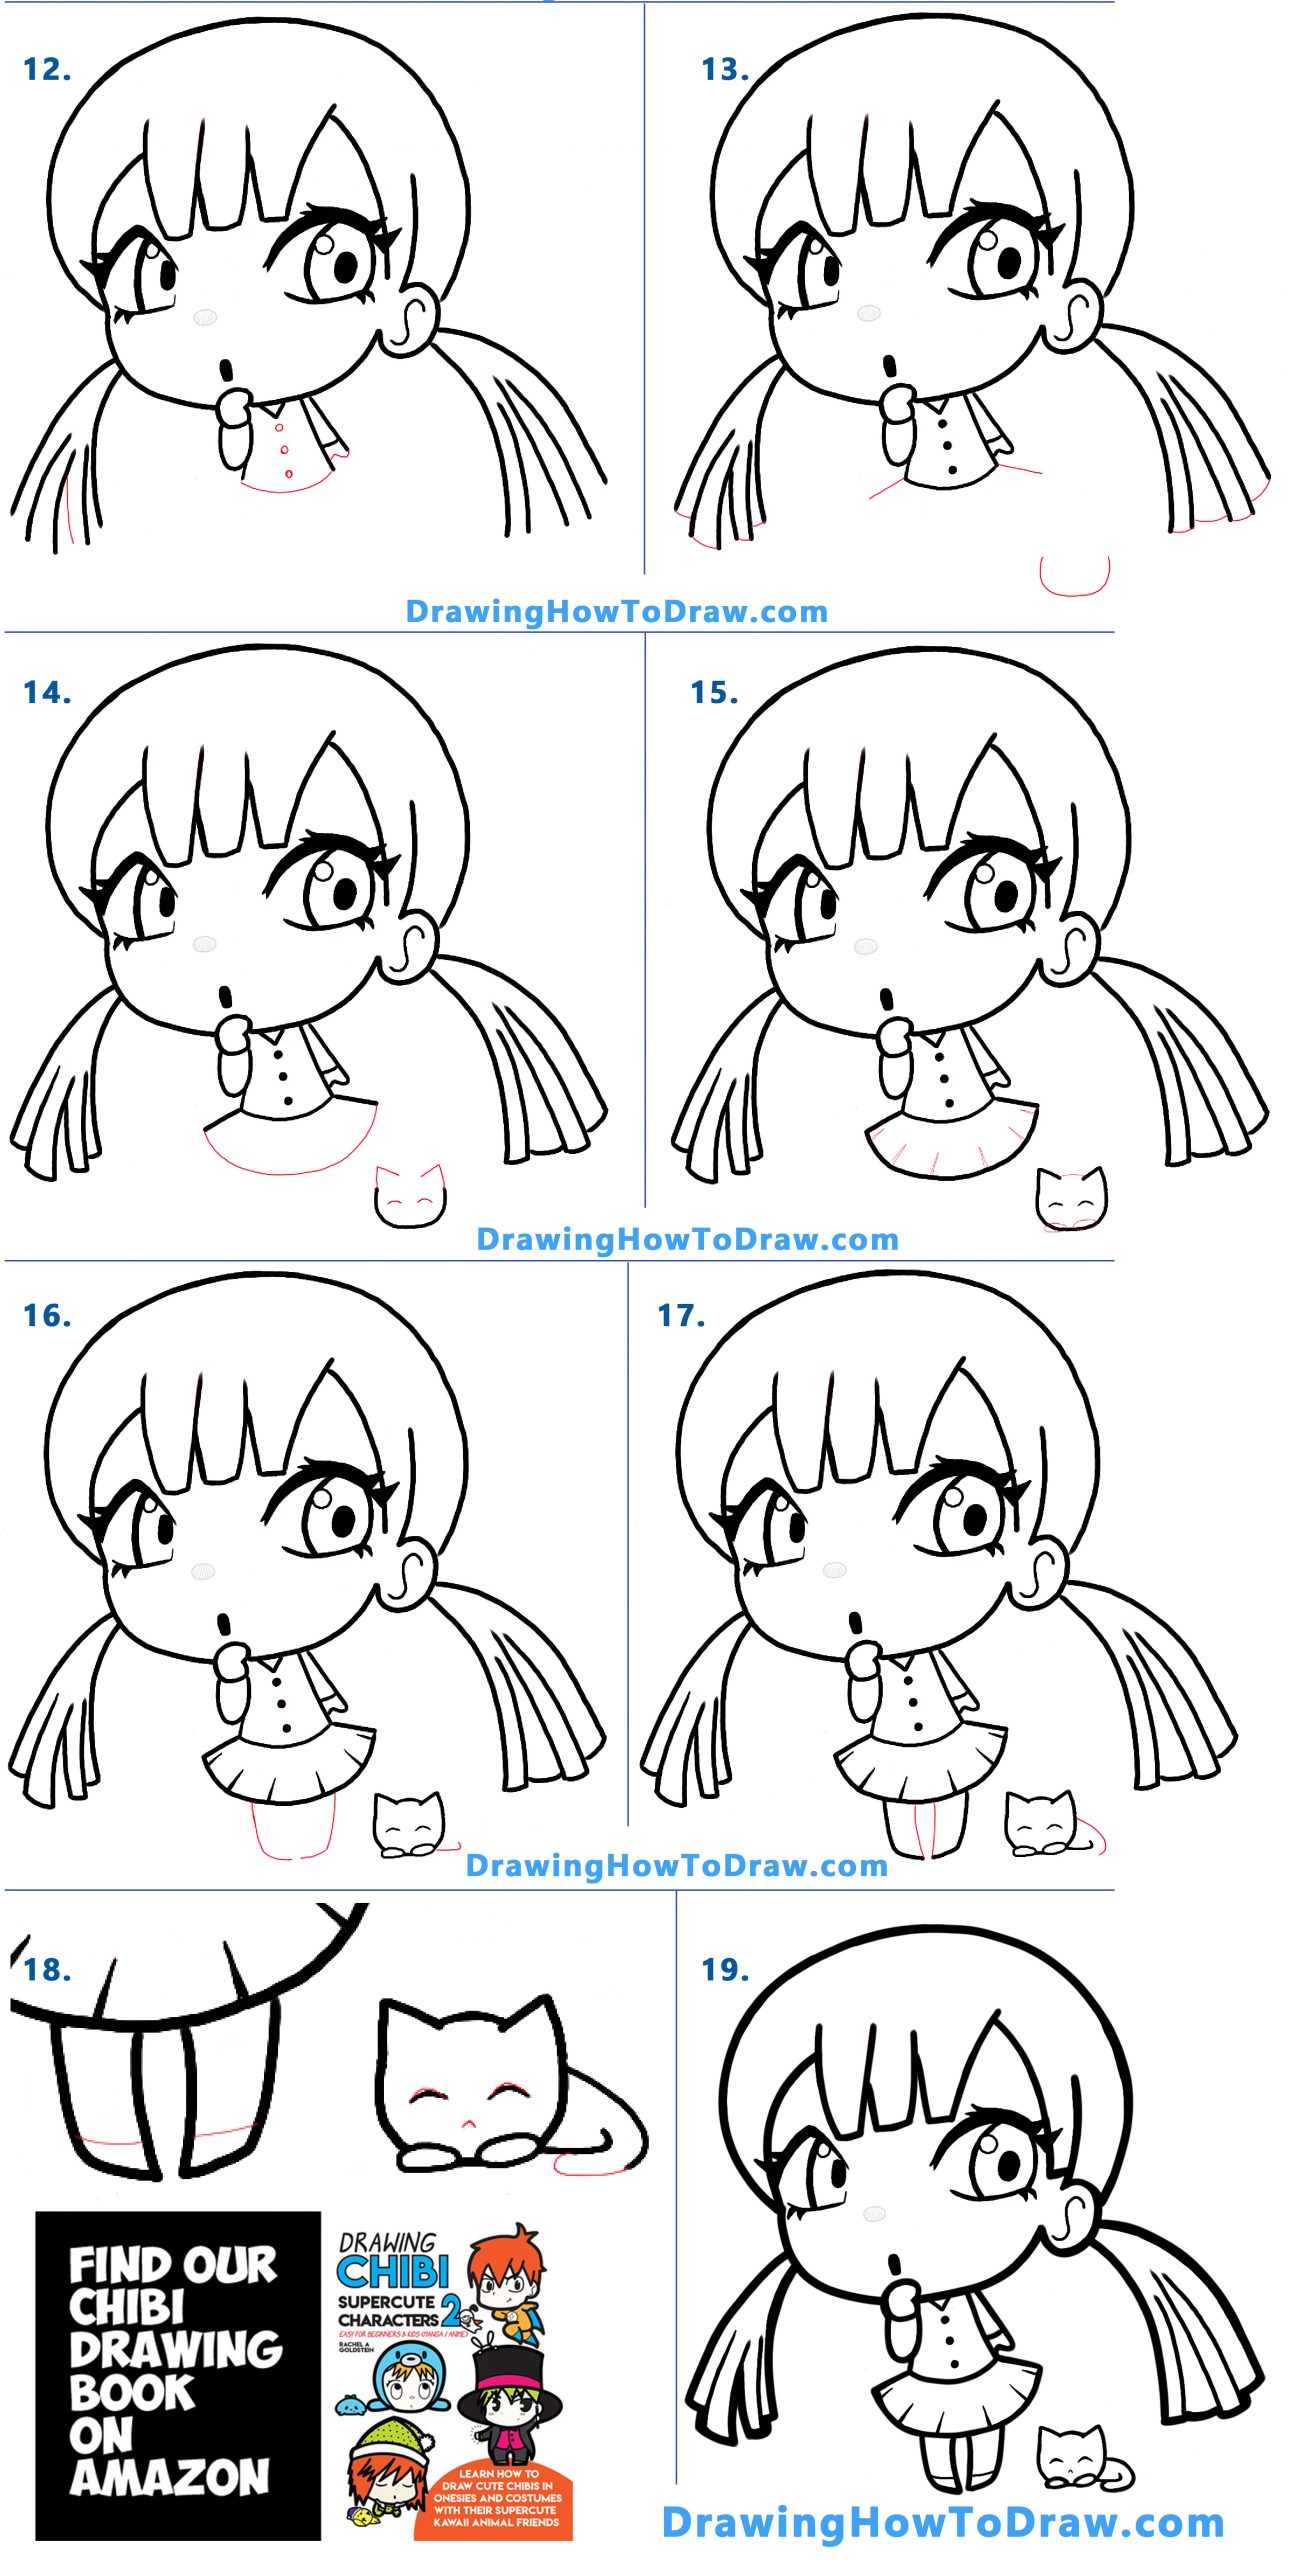 Cute Anime Girl  How To Draw A Manga Drawing  Art on Cut Out  Keep  How  To by Xion